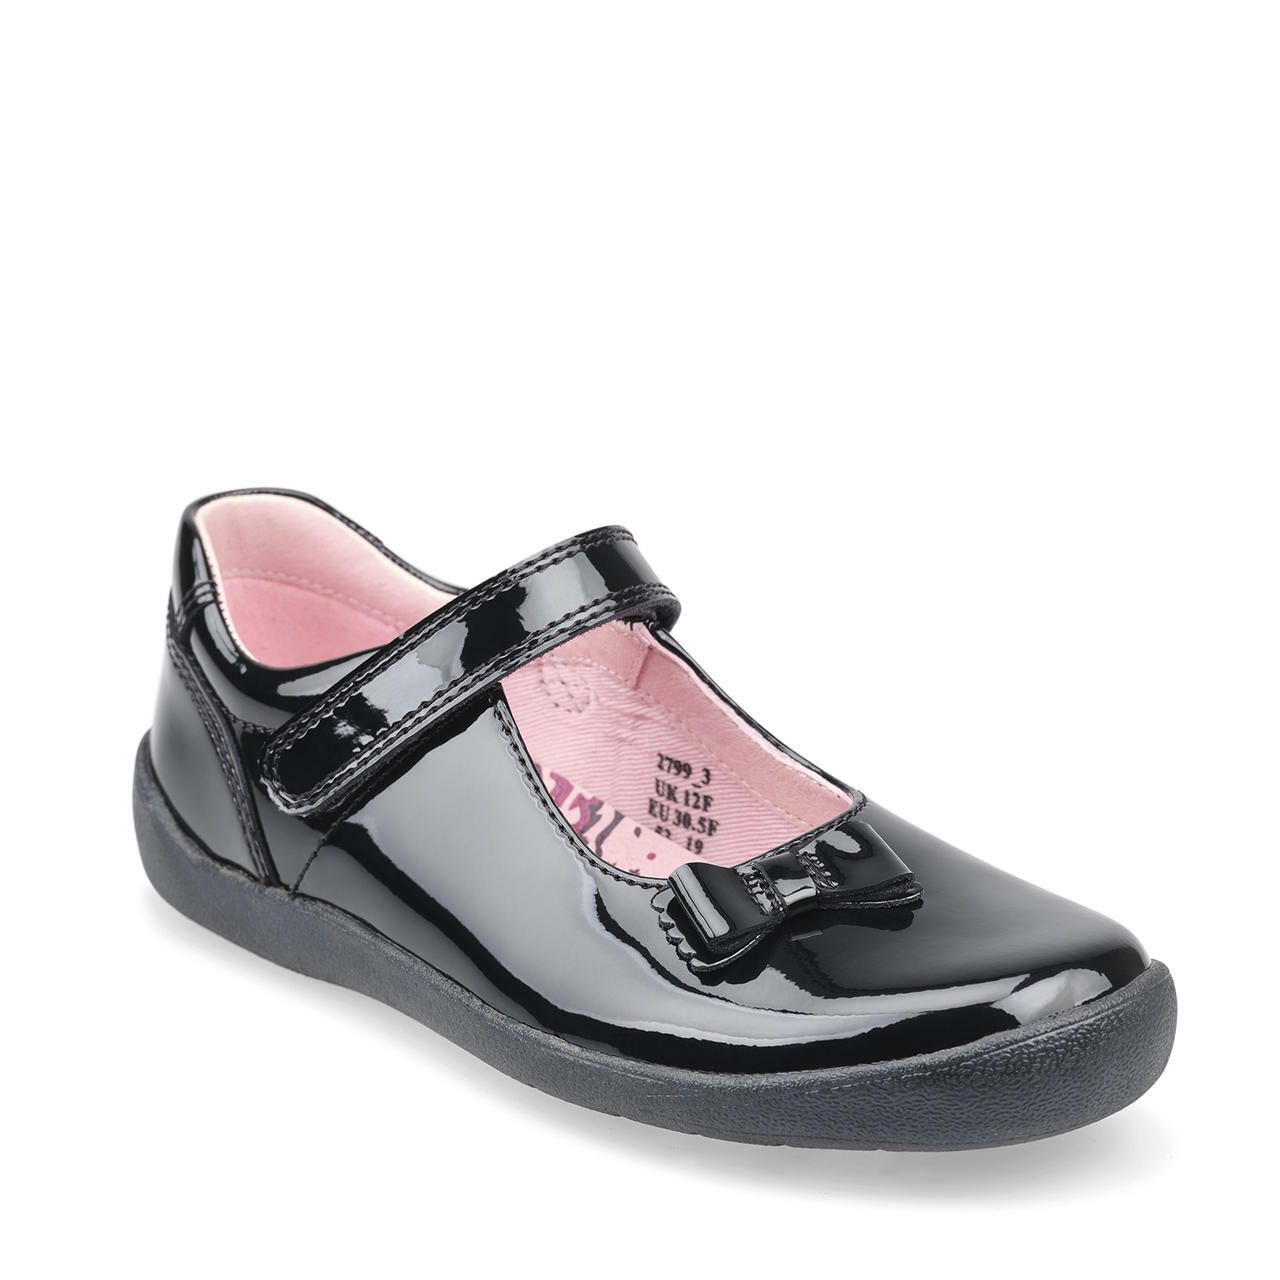 A girls Mary Jane school shoe by Start Rite, style Giggle, in black patent with velcro fastening. Angled view.